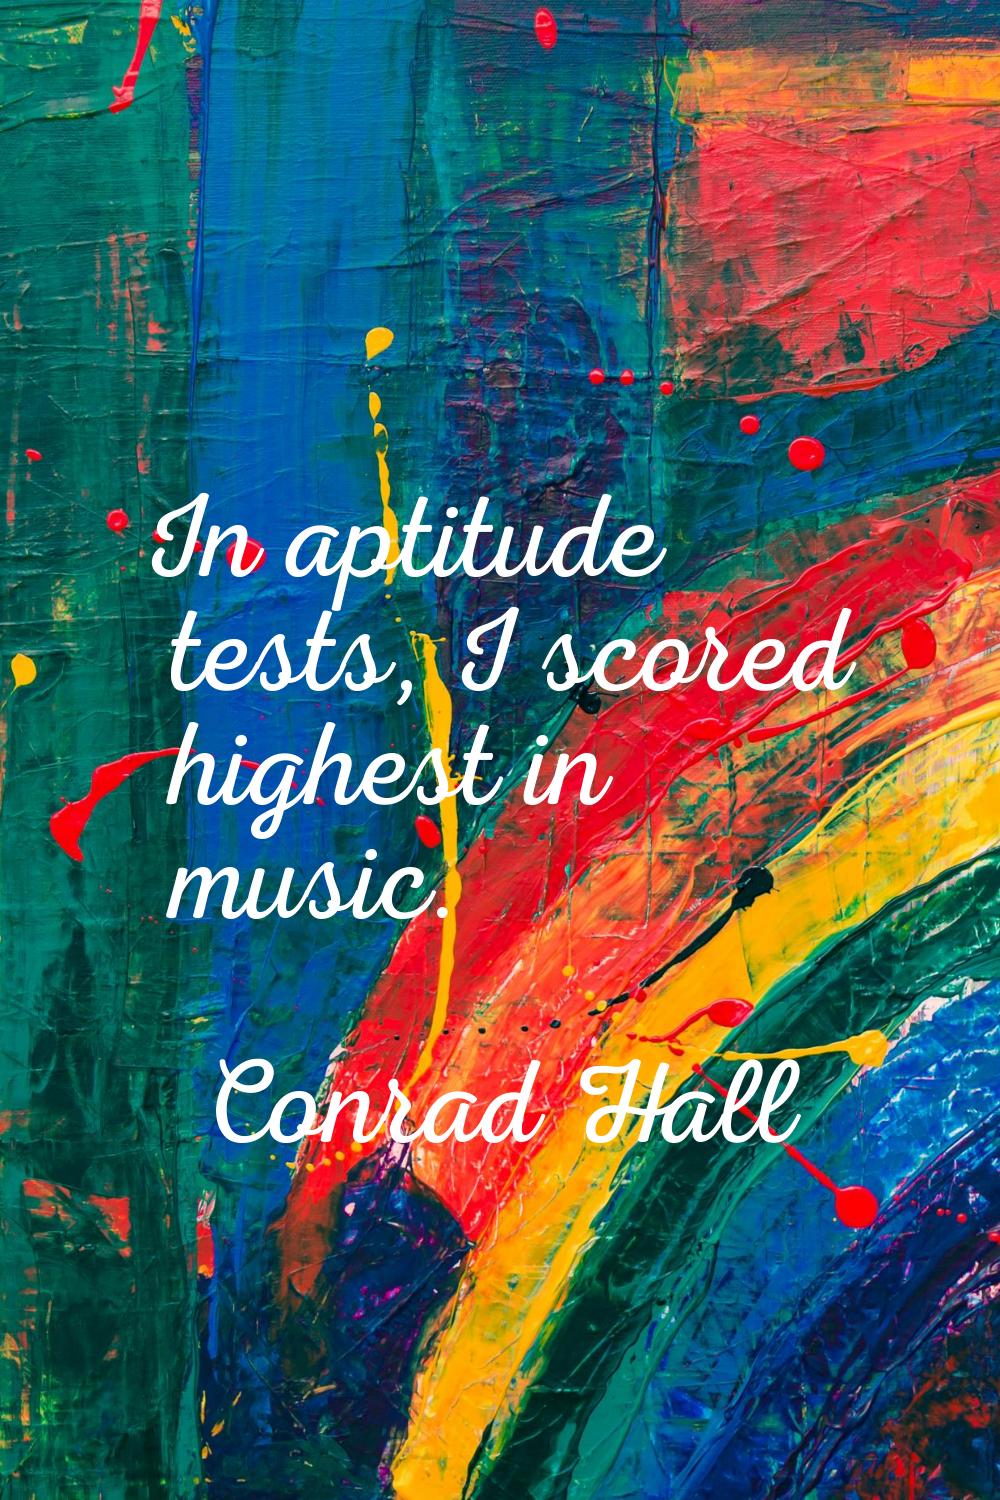 In aptitude tests, I scored highest in music.